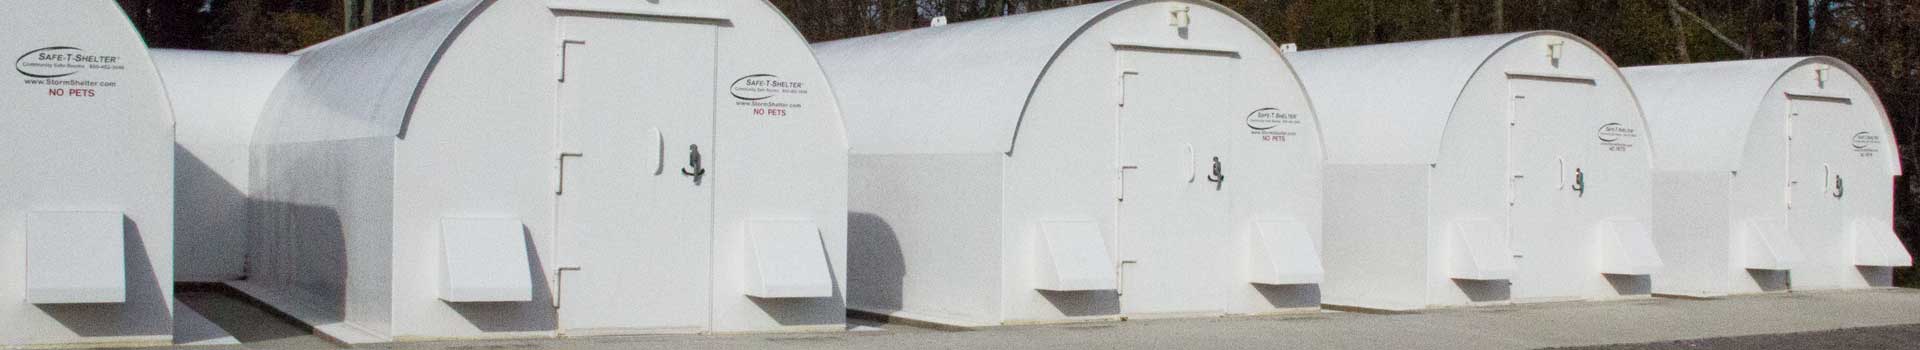 Sportsman Lake Road Community Storm Shelters from road